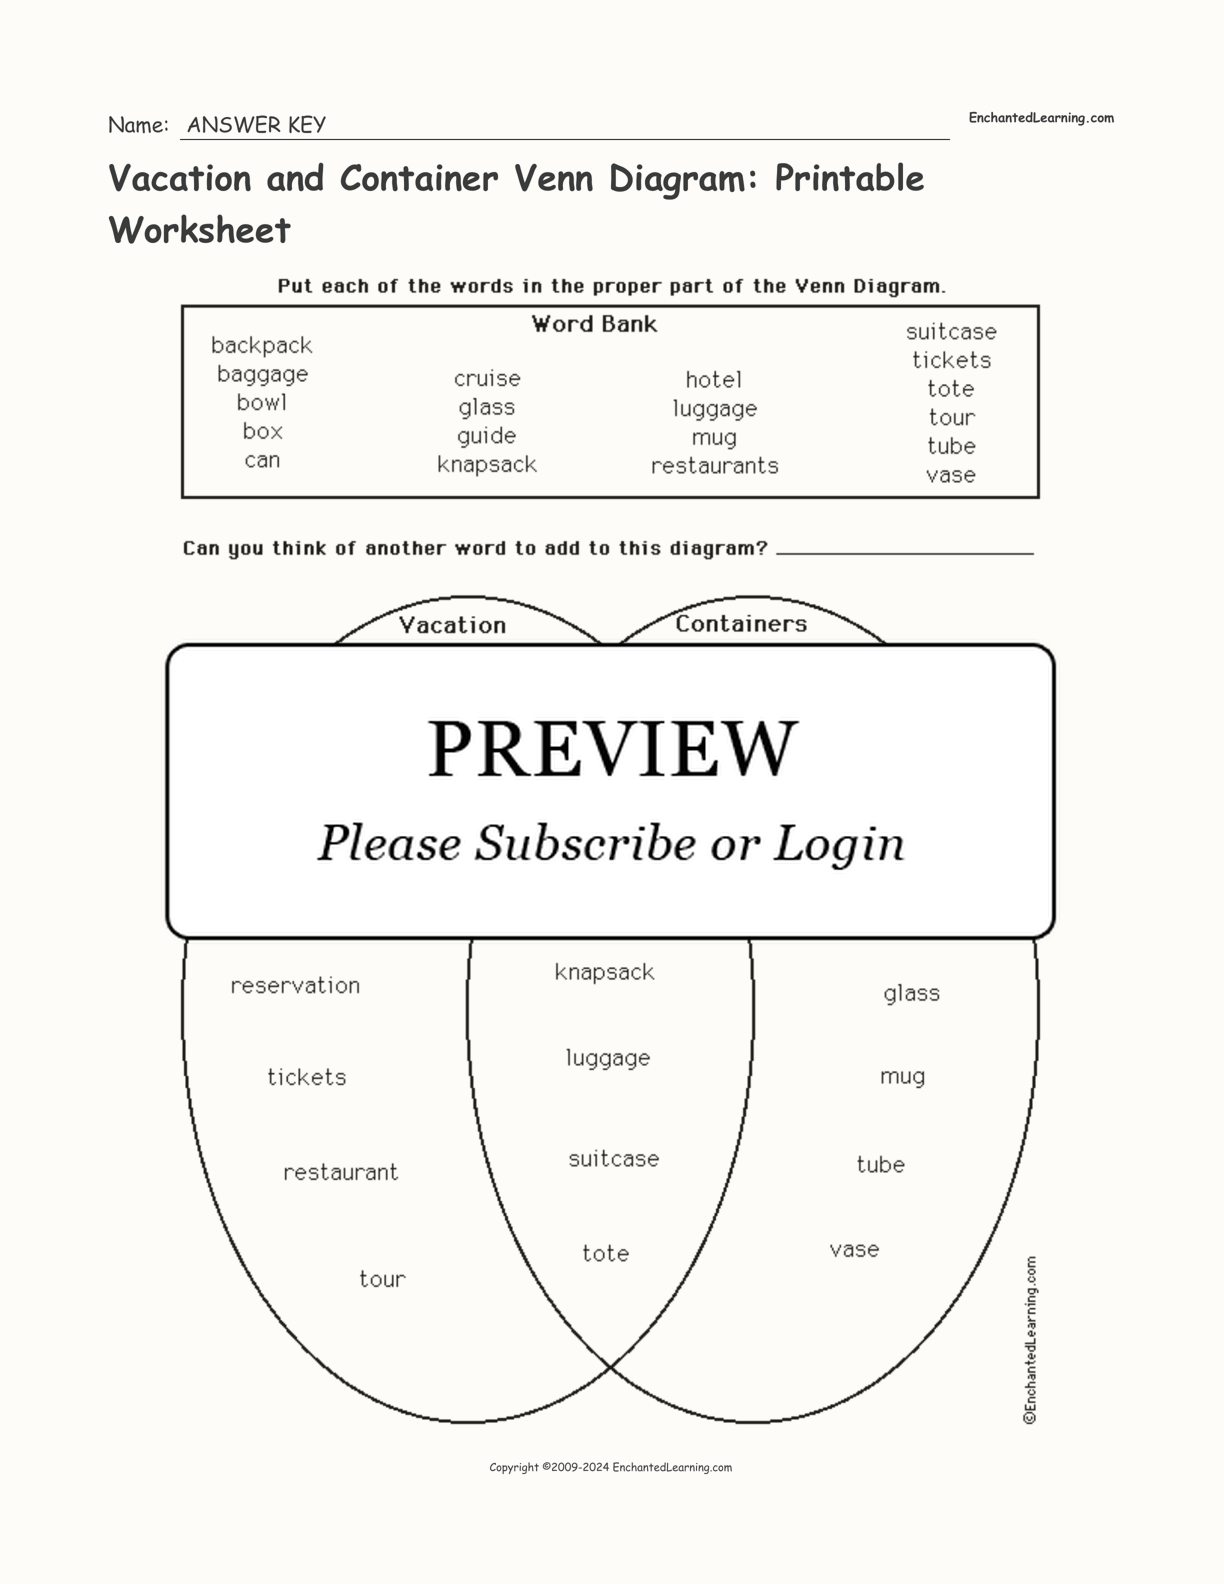 Vacation and Container Venn Diagram: Printable Worksheet interactive worksheet page 2